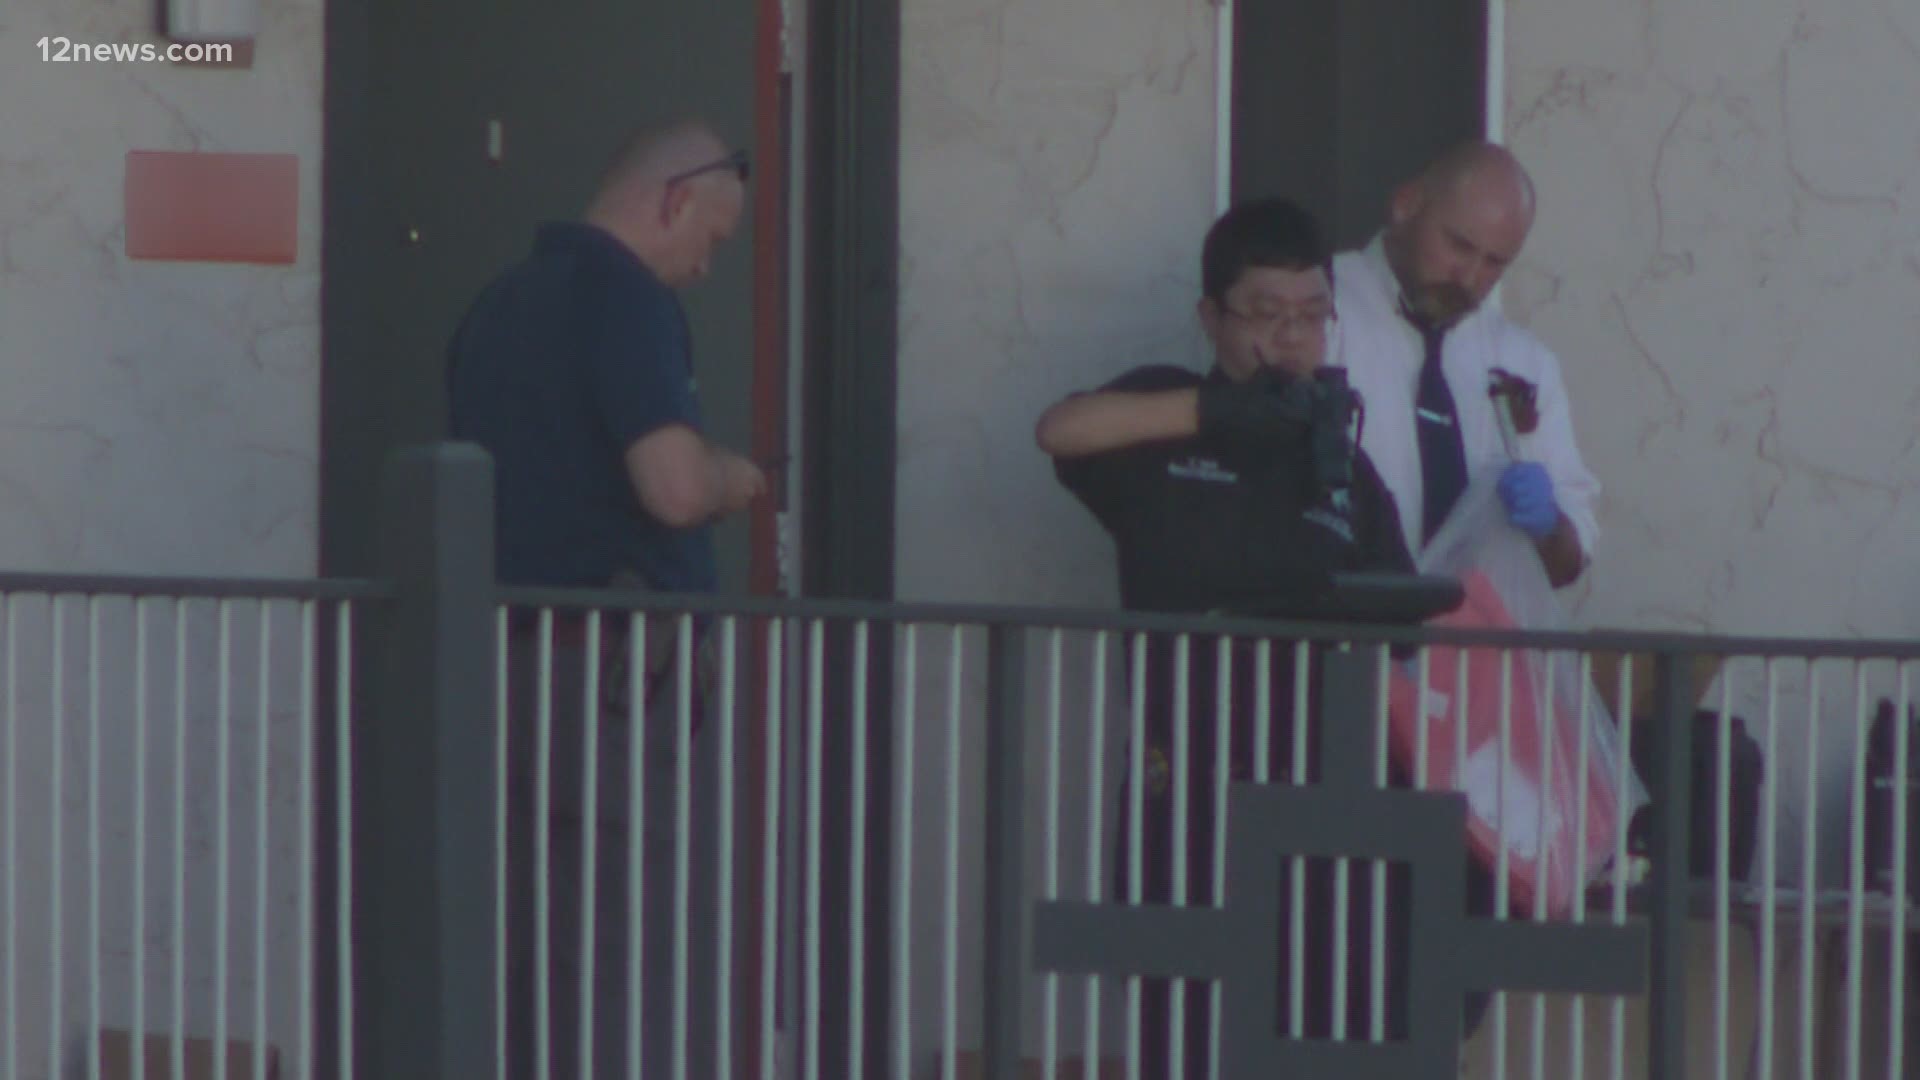 Officers found the bodies of two children, ages 7 and 9, inside of an apartment in Tempe during an investigation early Saturday morning.